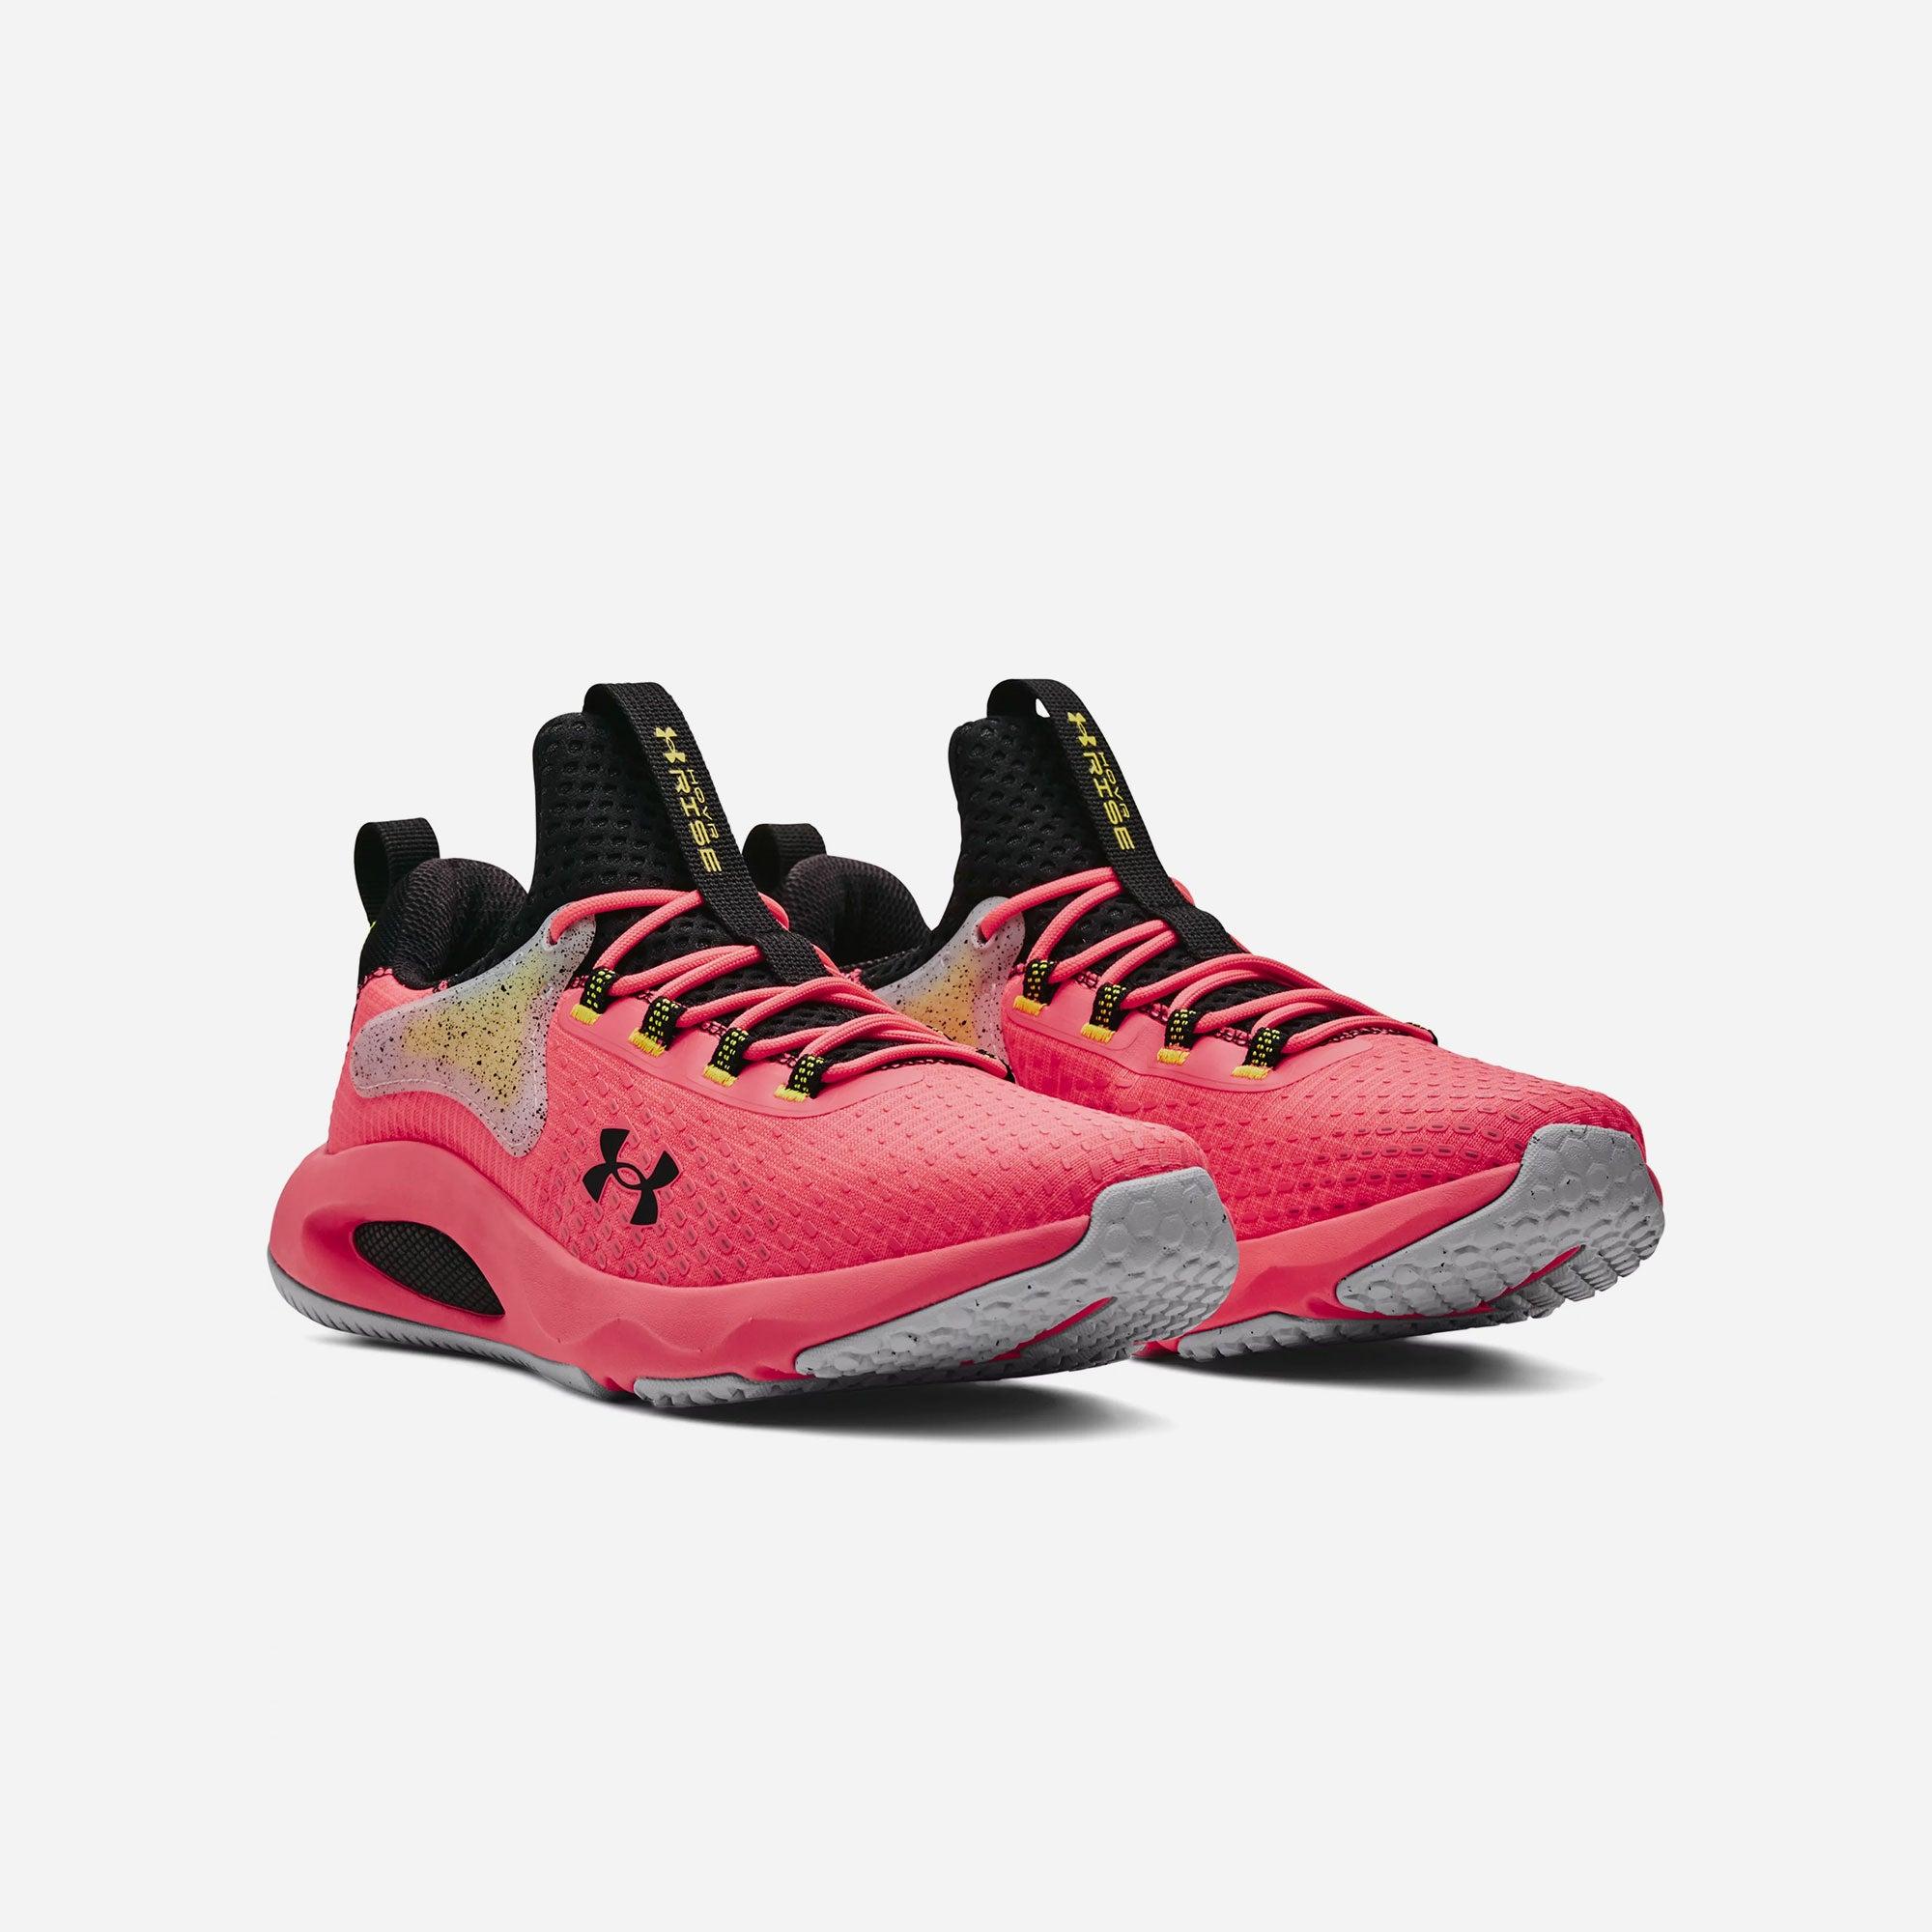 Giày thể thao nam Under Armour Rise 4 - 3025565-600